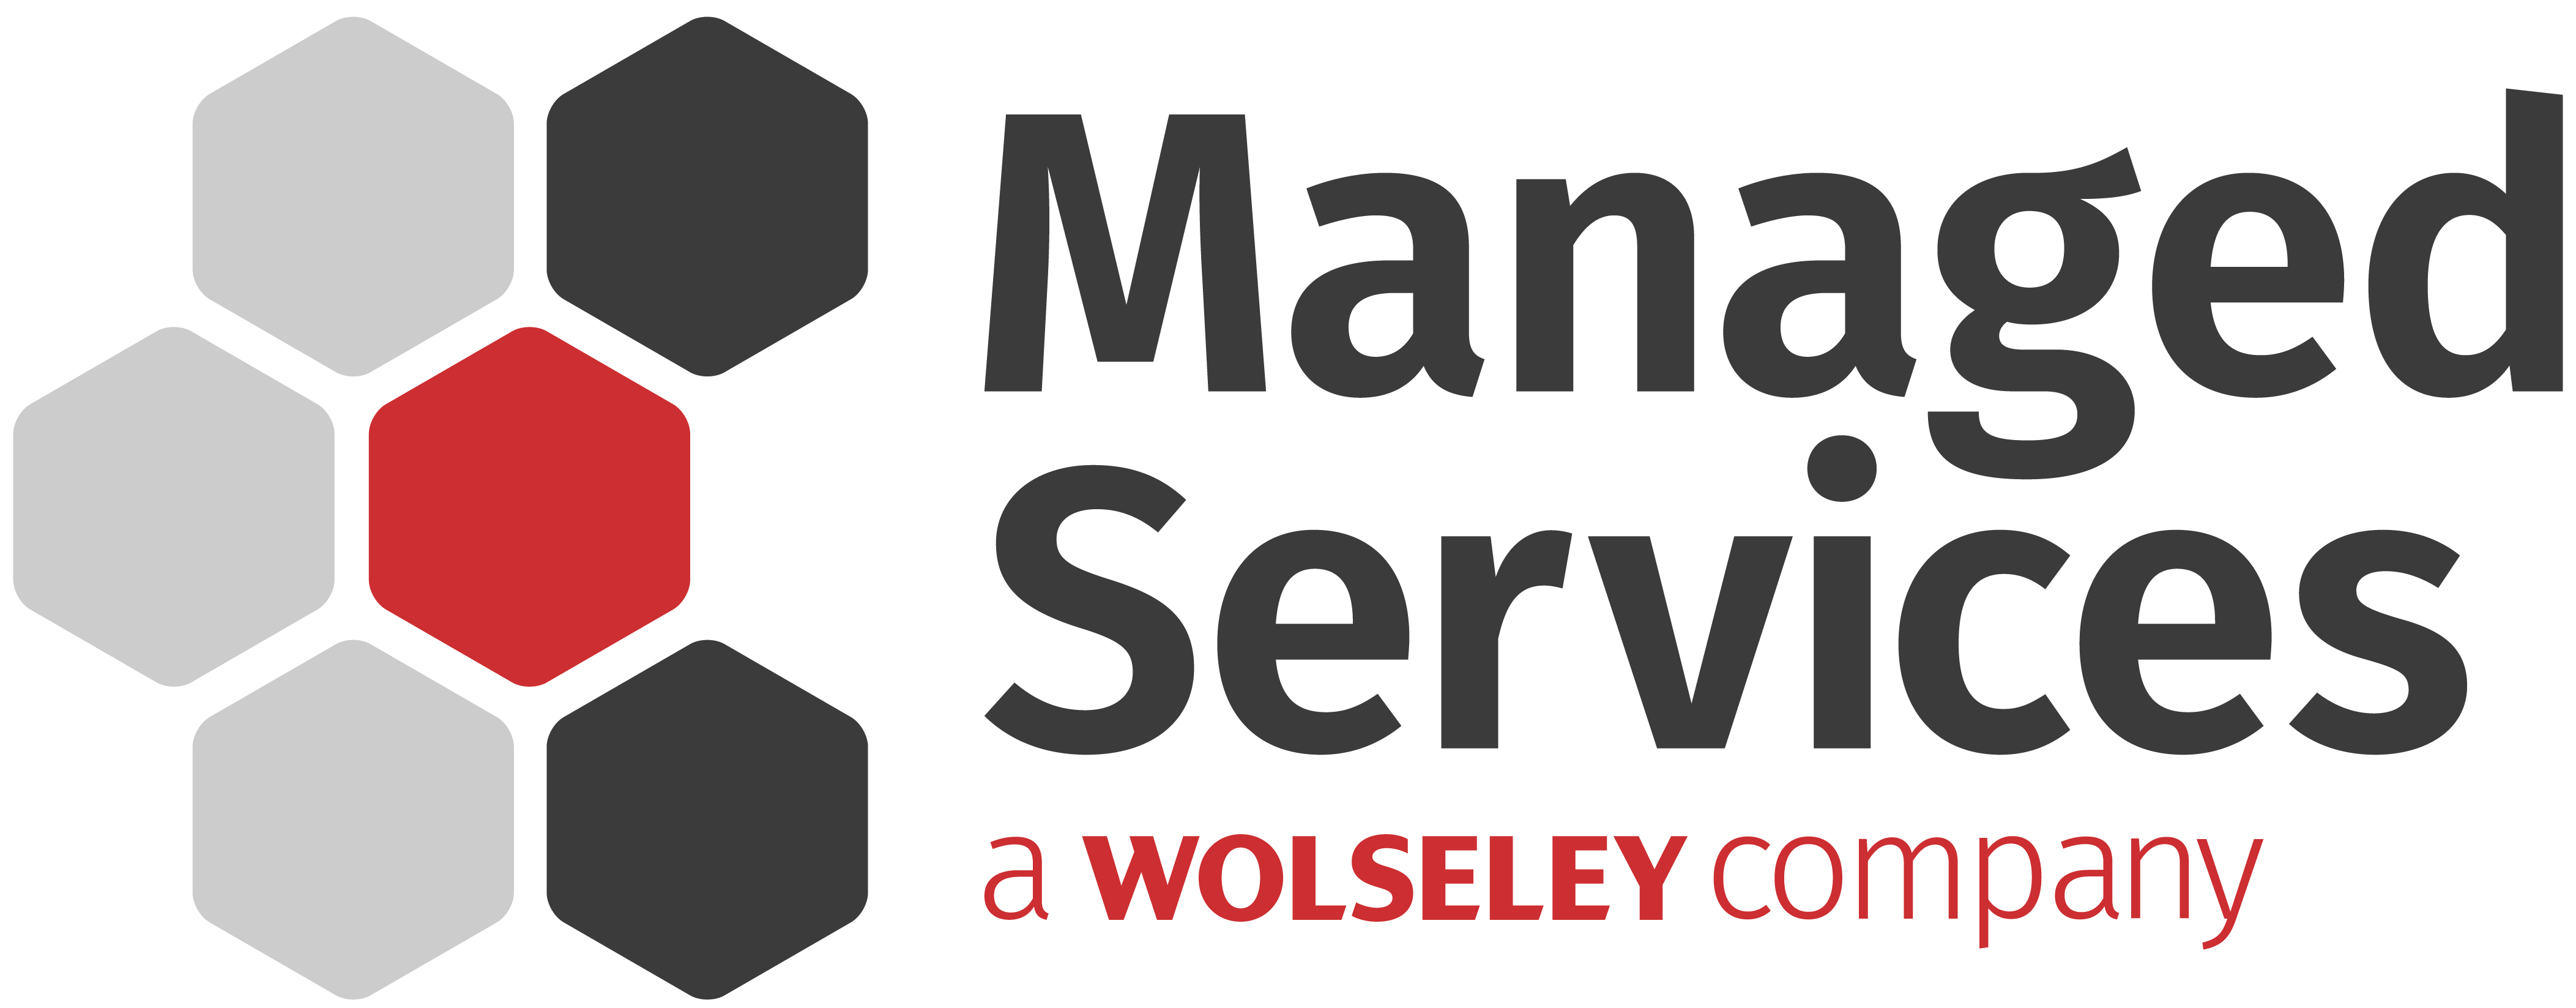 Wolseley_Managed_Services_Mark_RGB.PNG